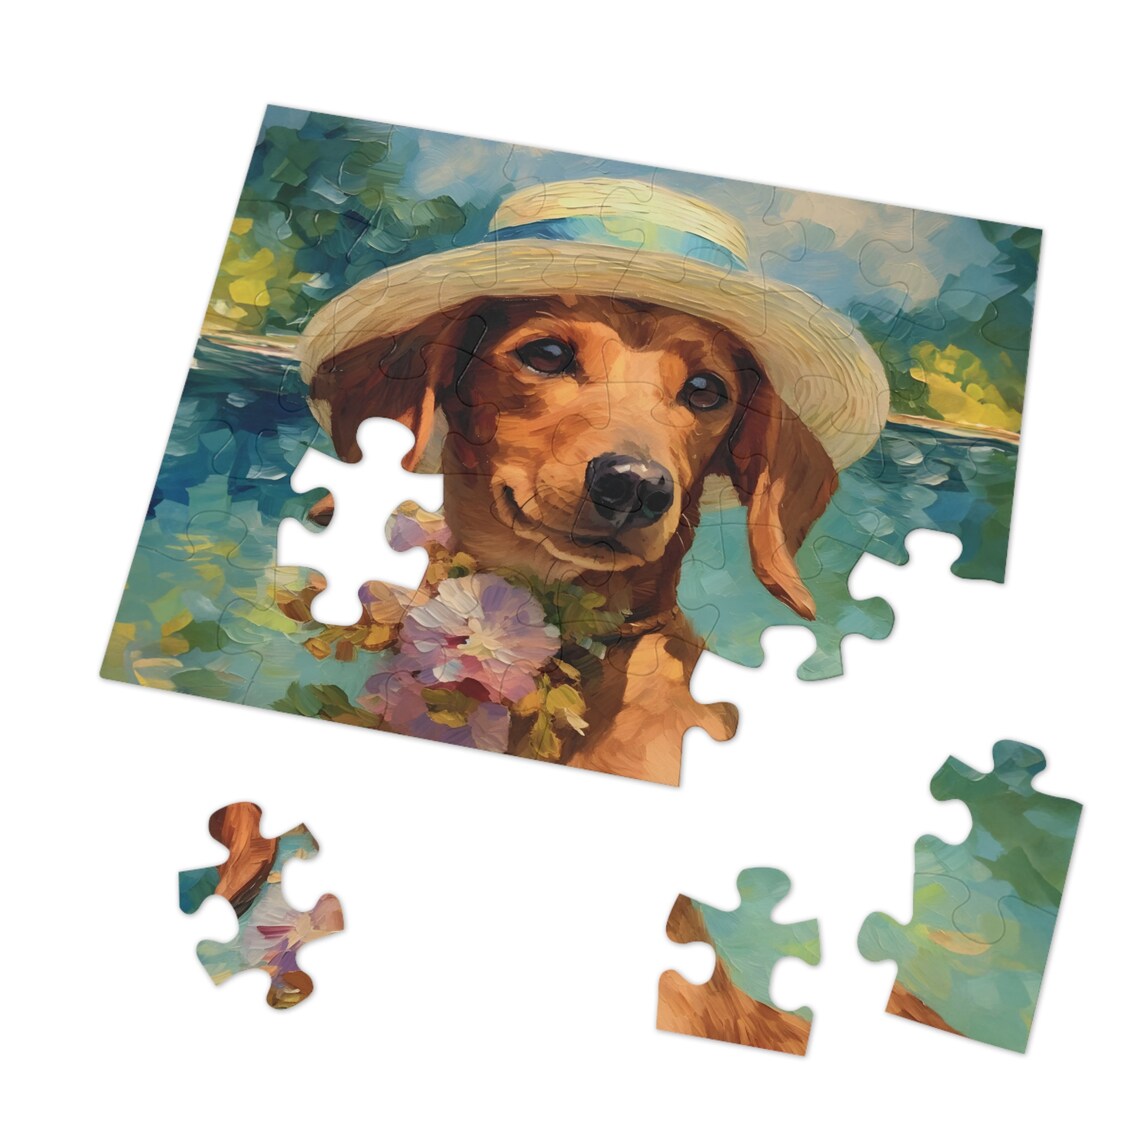 The Dachshund Monet Puzzle isn't just a puzzle – it's a masterpiece waiting to be unveiled. Whether you're seeking a moment of tranquil contemplation or bonding with loved ones, this puzzle promises hours of joy and aesthetic delight. #PuzzleFun #CreativeChallenges